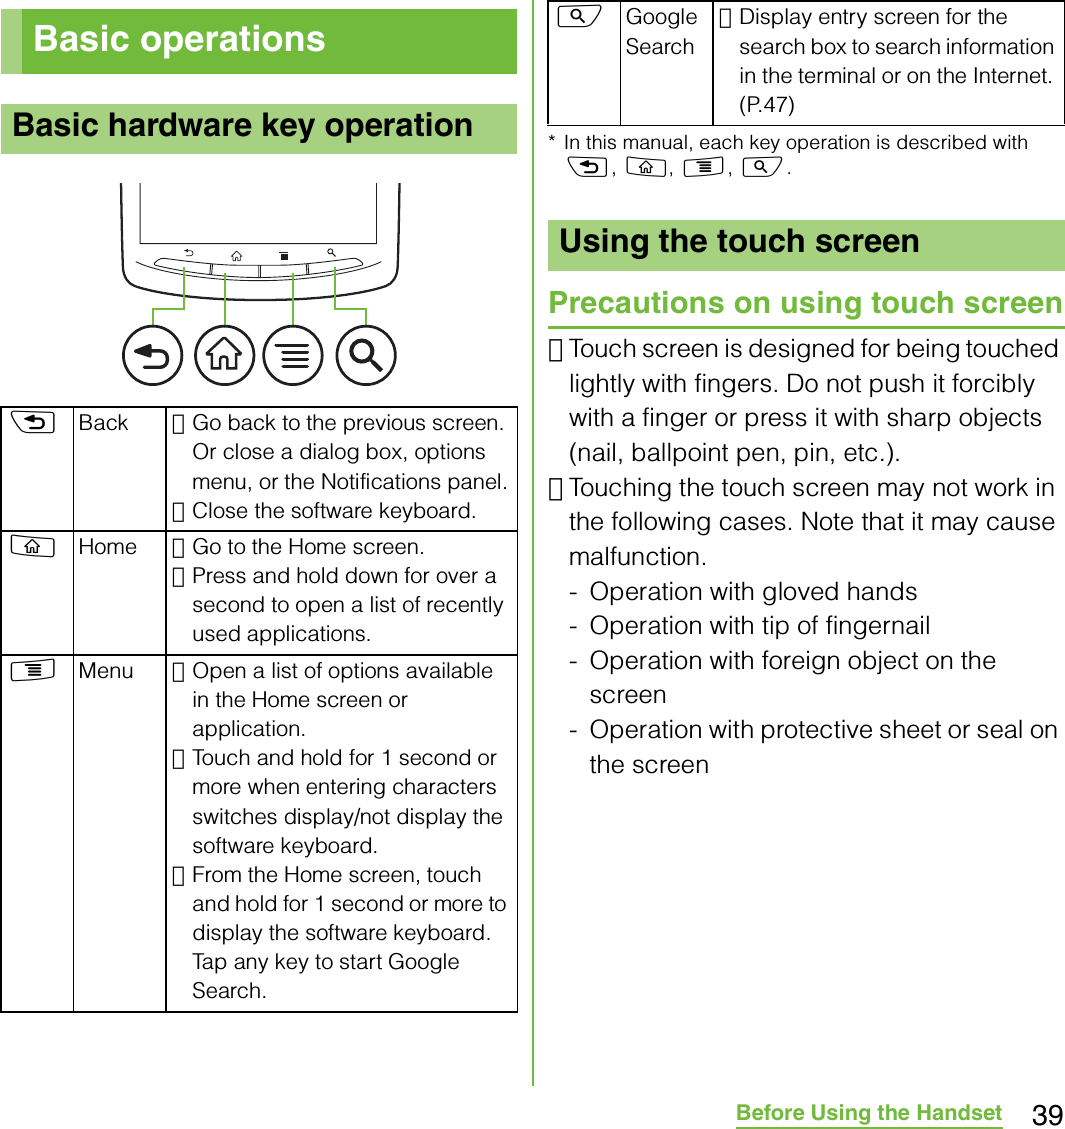 39Before Using the Handset* In this manual, each key operation is described with x, y, t, s.Precautions on using touch screen･Touch screen is designed for being touched lightly with fingers. Do not push it forcibly with a finger or press it with sharp objects (nail, ballpoint pen, pin, etc.).･Touching the touch screen may not work in the following cases. Note that it may cause malfunction.- Operation with gloved hands- Operation with tip of fingernail- Operation with foreign object on the screen- Operation with protective sheet or seal on the screenBasic operationsBasic hardware key operationxBack ･Go back to the previous screen. Or close a dialog box, options menu, or the Notifications panel.･Close the software keyboard.yHome ･Go to the Home screen.･Press and hold down for over a second to open a list of recently used applications.tMenu ･Open a list of options available in the Home screen or application.･Touch and hold for 1 second or more when entering characters switches display/not display the software keyboard.･From the Home screen, touch and hold for 1 second or more to display the software keyboard. Tap any key to start Google Search.sGoogle Search･Display entry screen for the search box to search information in the terminal or on the Internet. (P.47)Using the touch screen